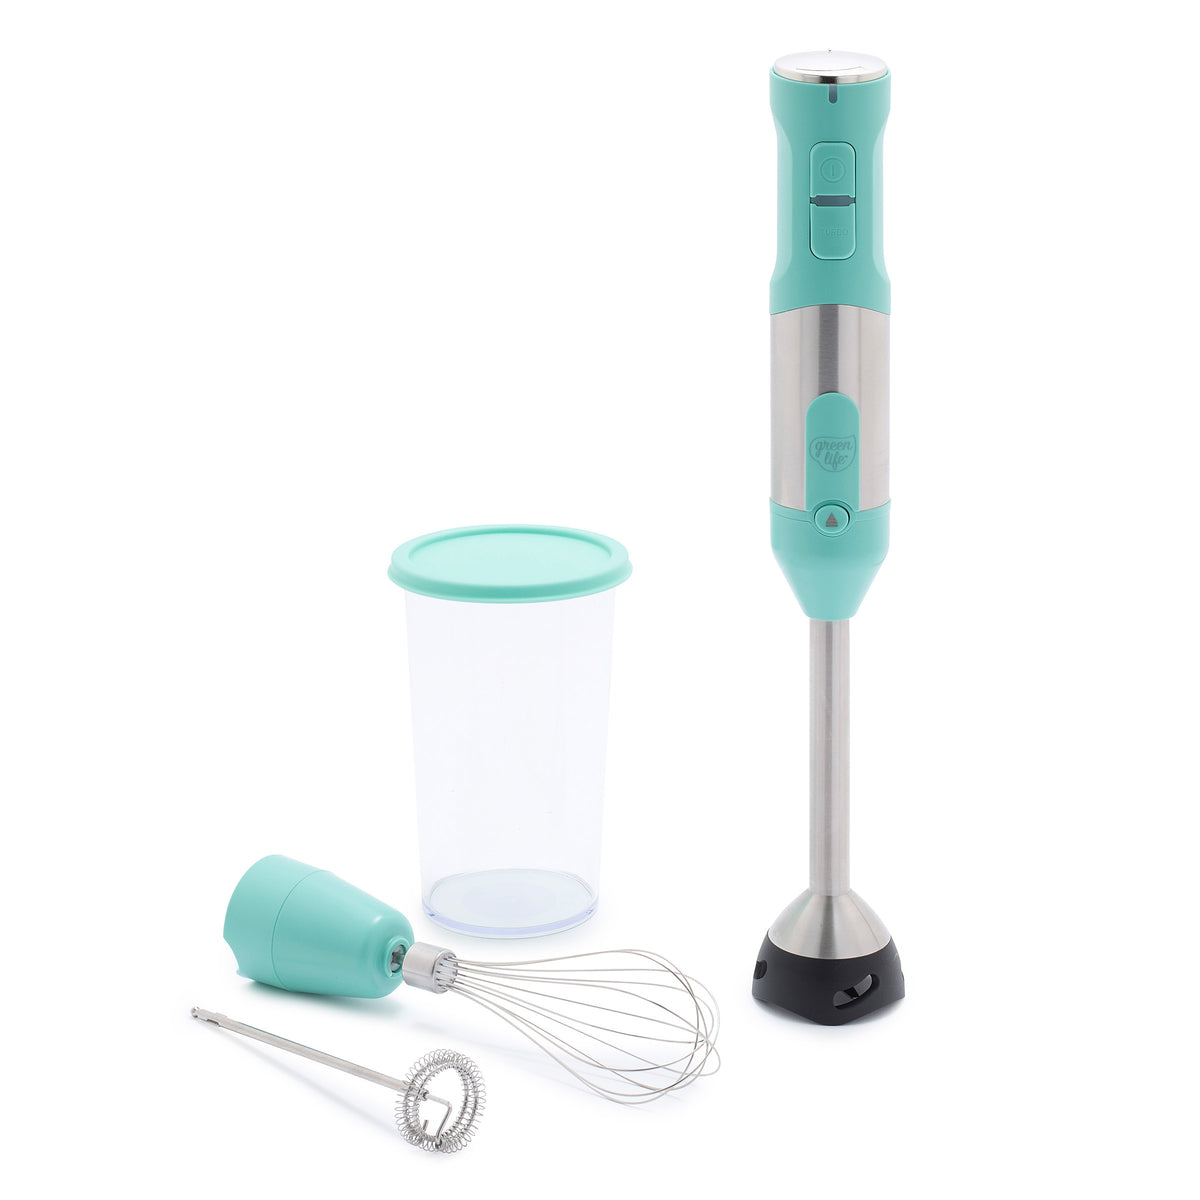 GreenLife Variable Speed Hand Blender, Turquoise